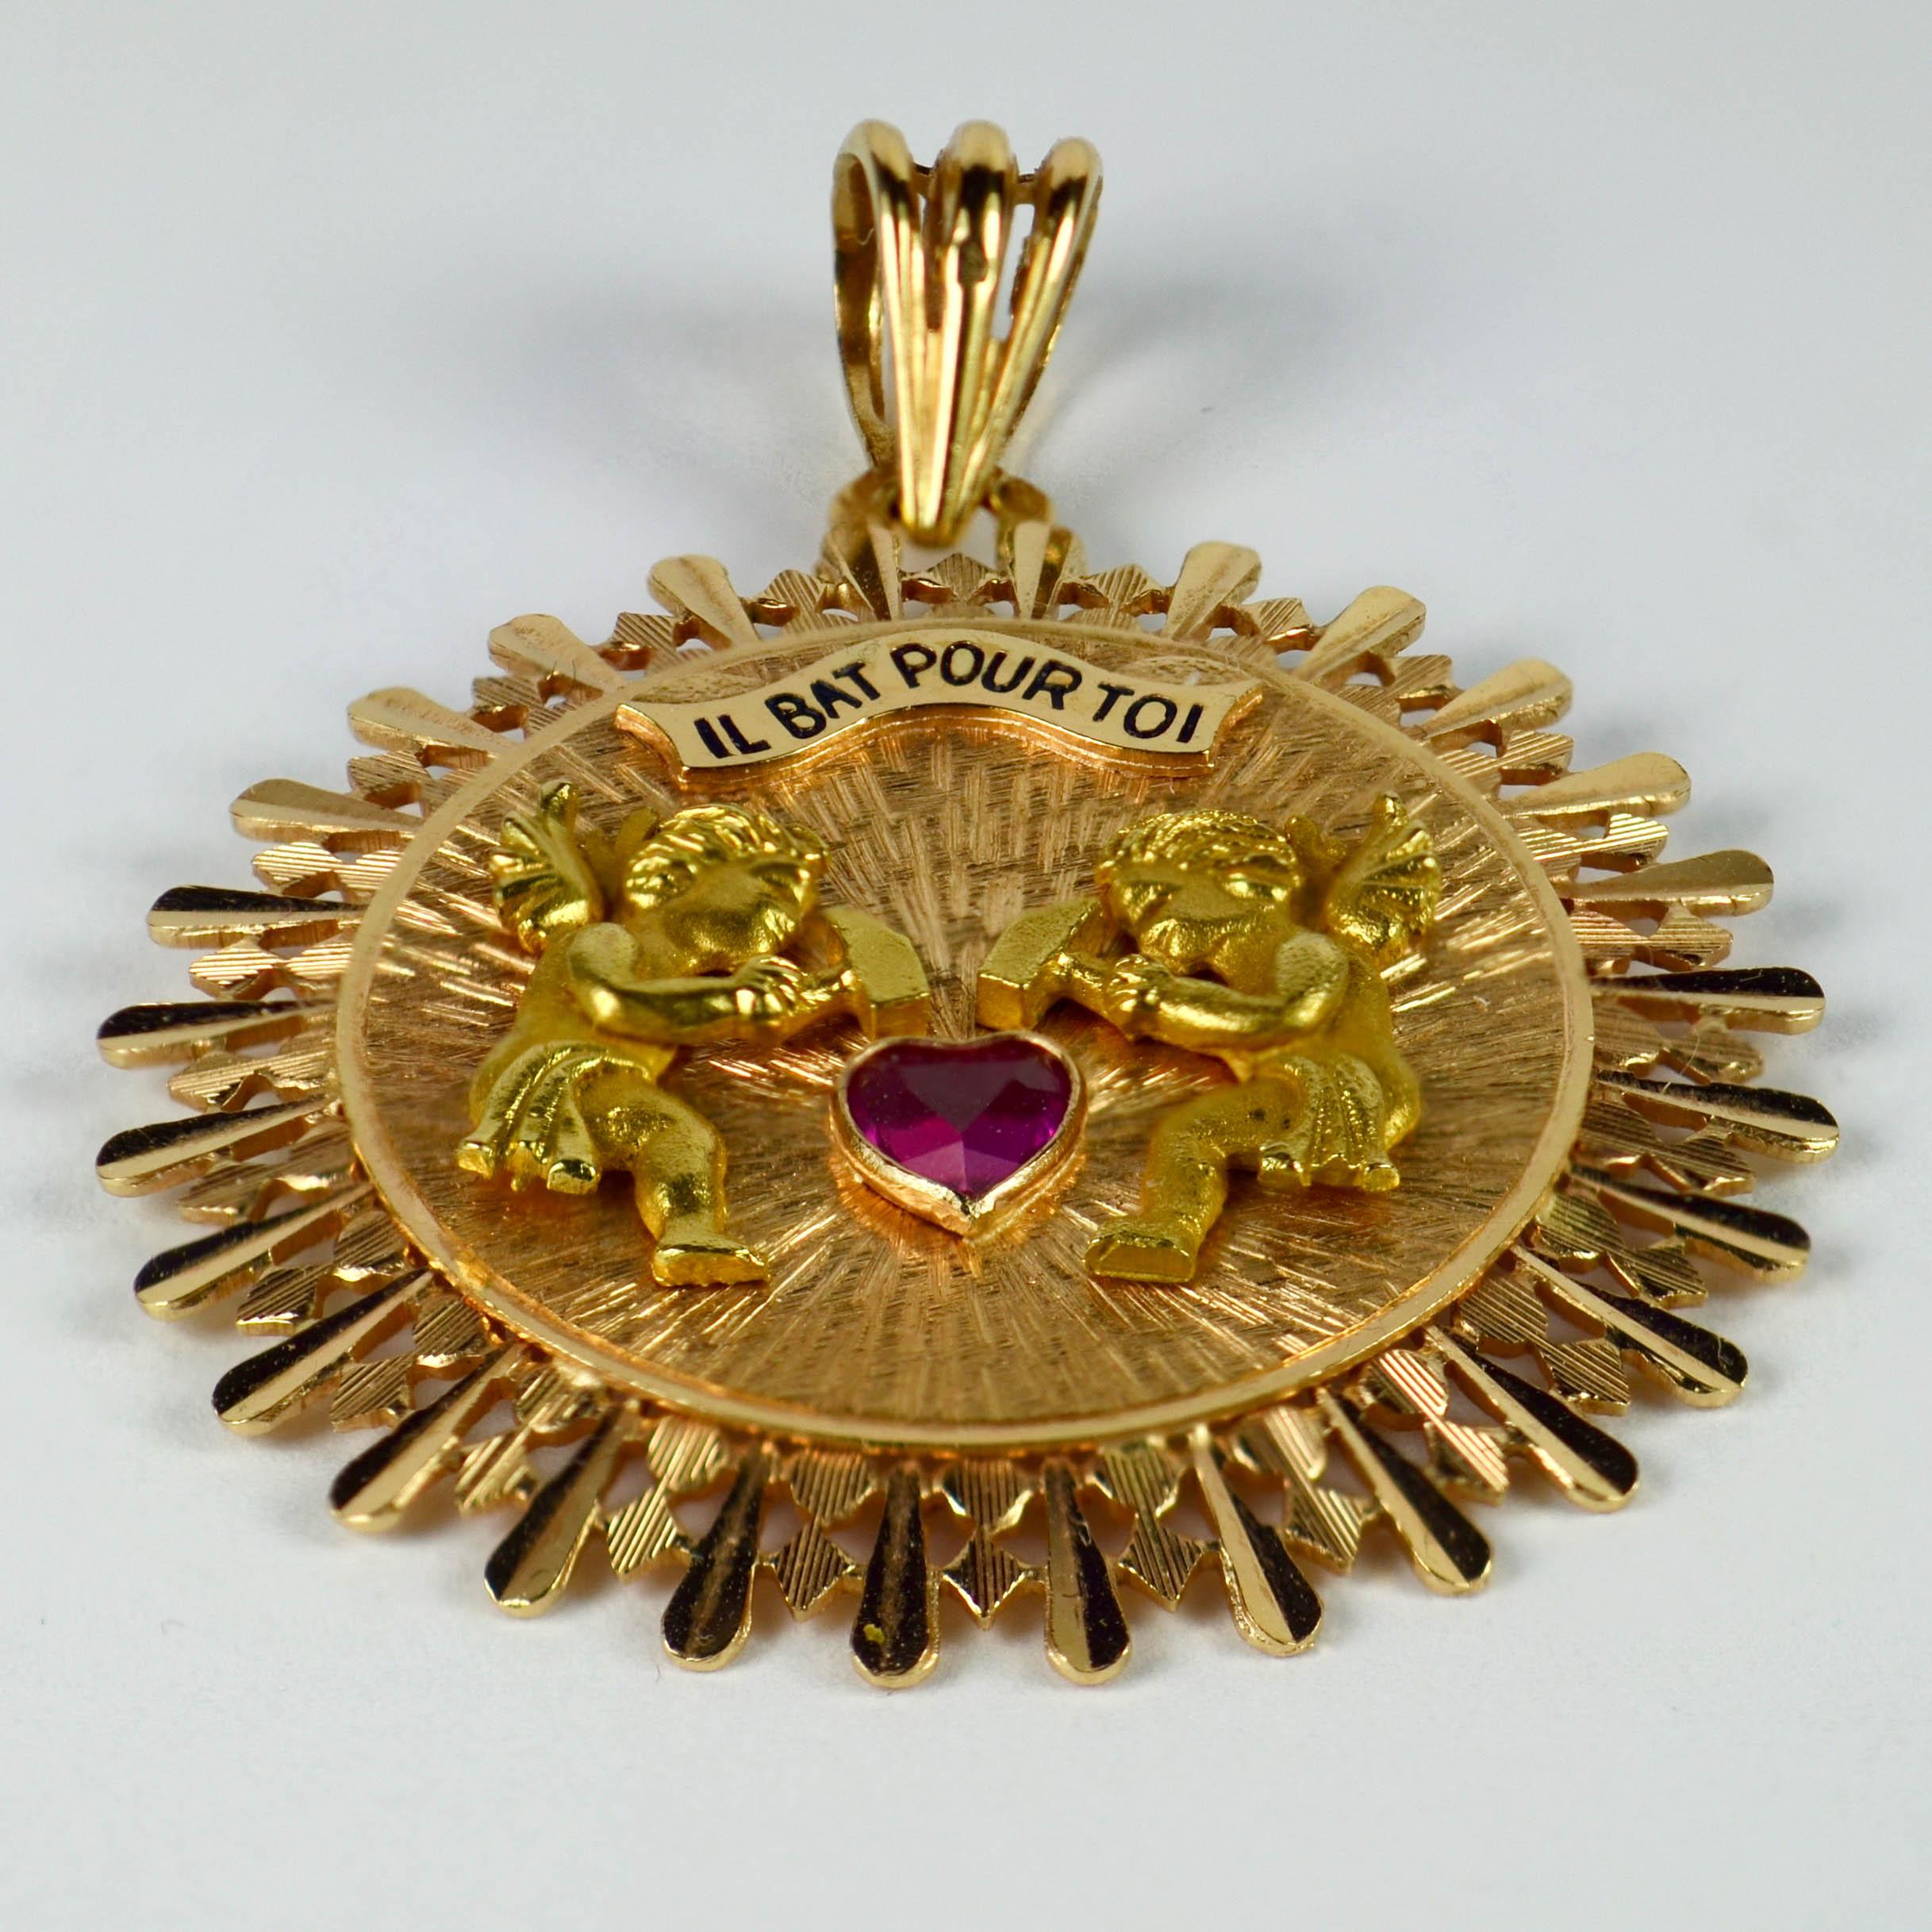 A French 18 karat (18K) rose gold charm pendant designed as a rose gold sunburst textured disk with two mechanical yellow gold cupid figures with hammers taking it in turns to hit the ruby love heart. Above them a enamelled scroll reads 'Il bat pour